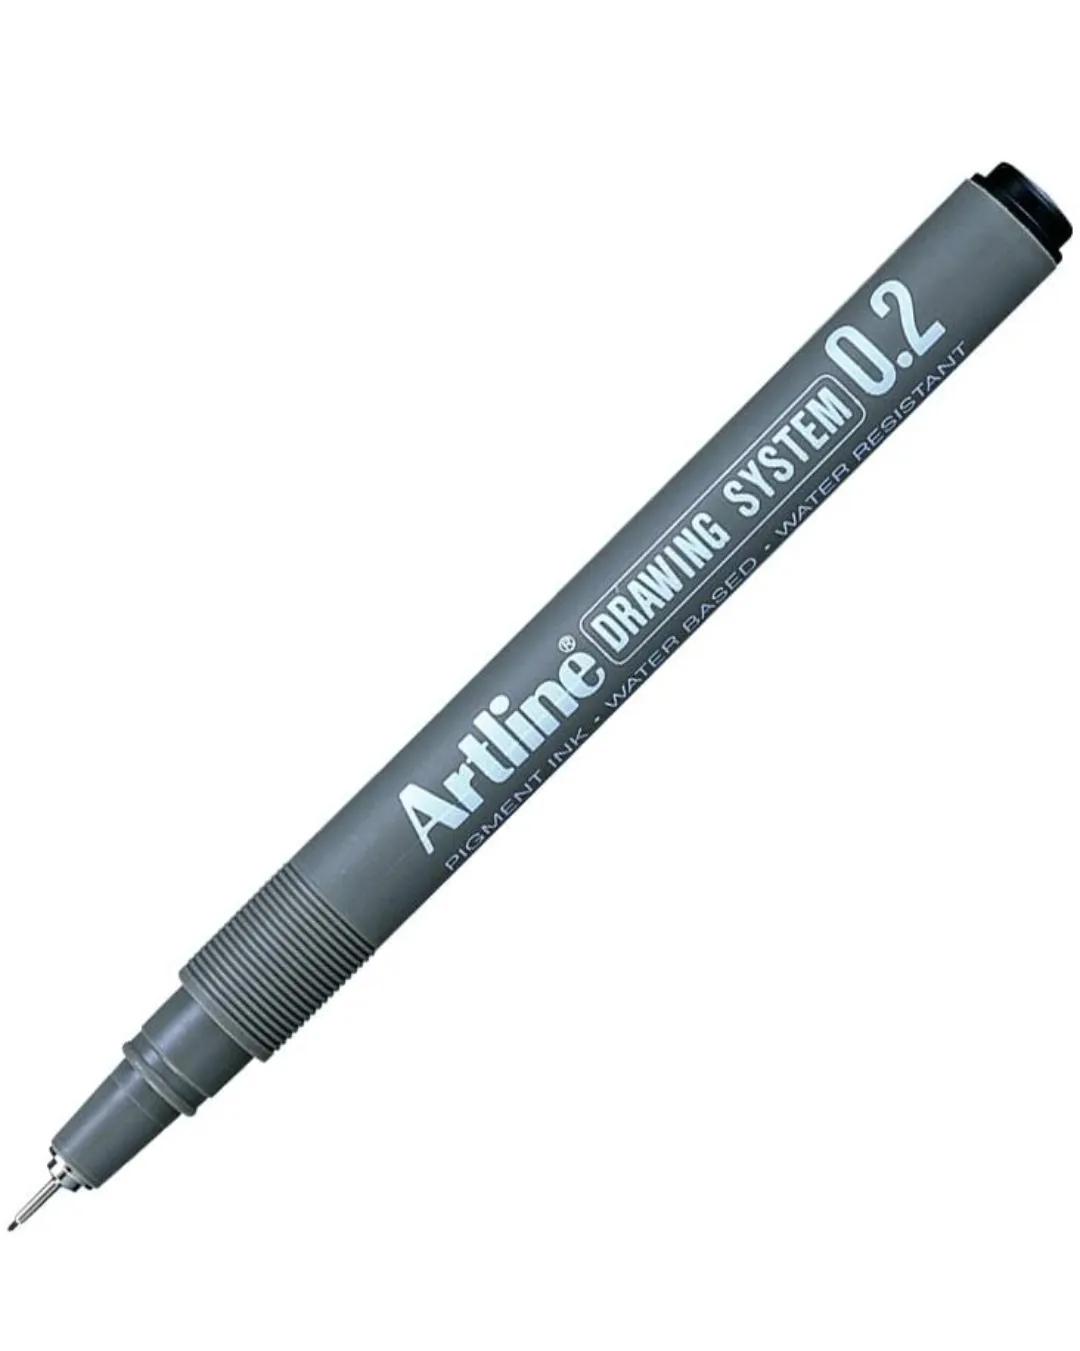 Artline Drawing System Artistic Technical Pen 0.2 mm Point Size Pack of 1